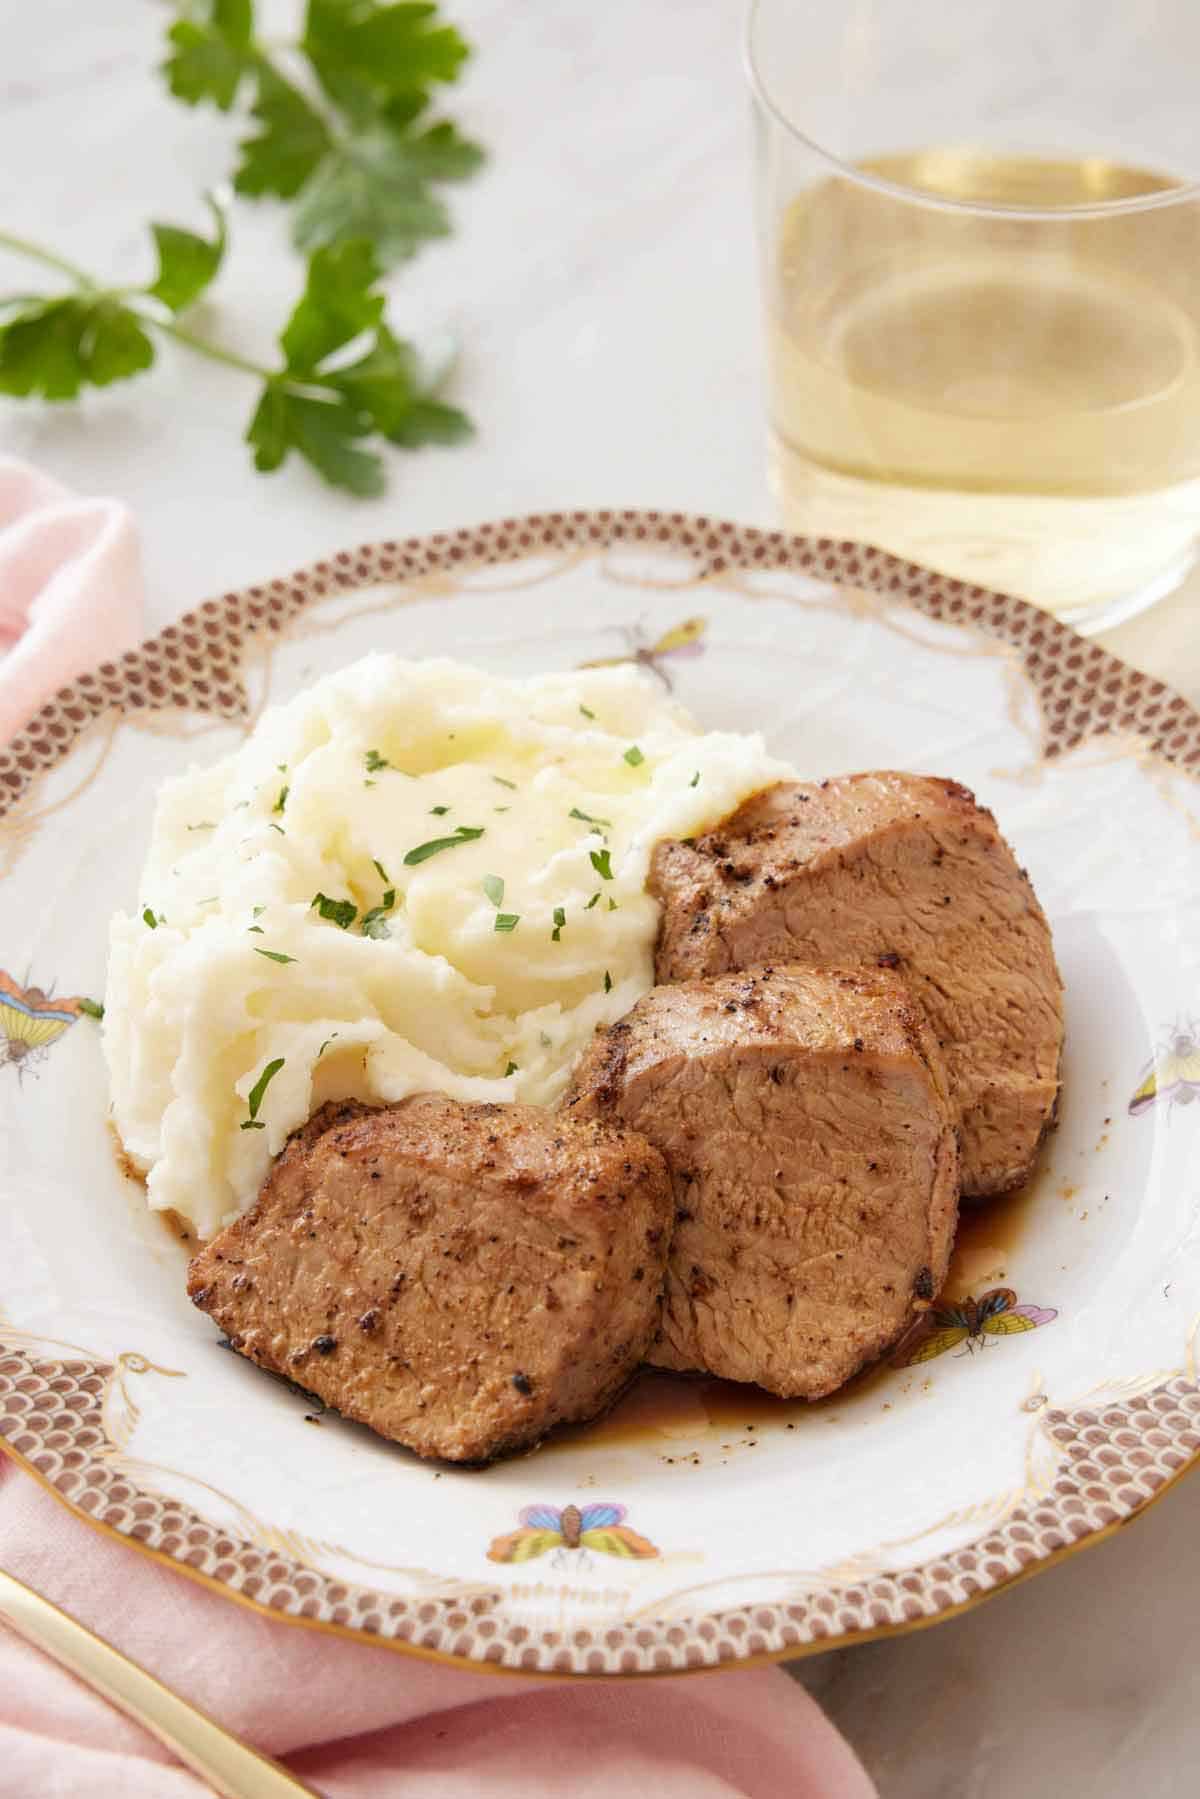 A plate with three pieces of pork tenderloin with mashed potatoes on the side with a glass of wine in the background.